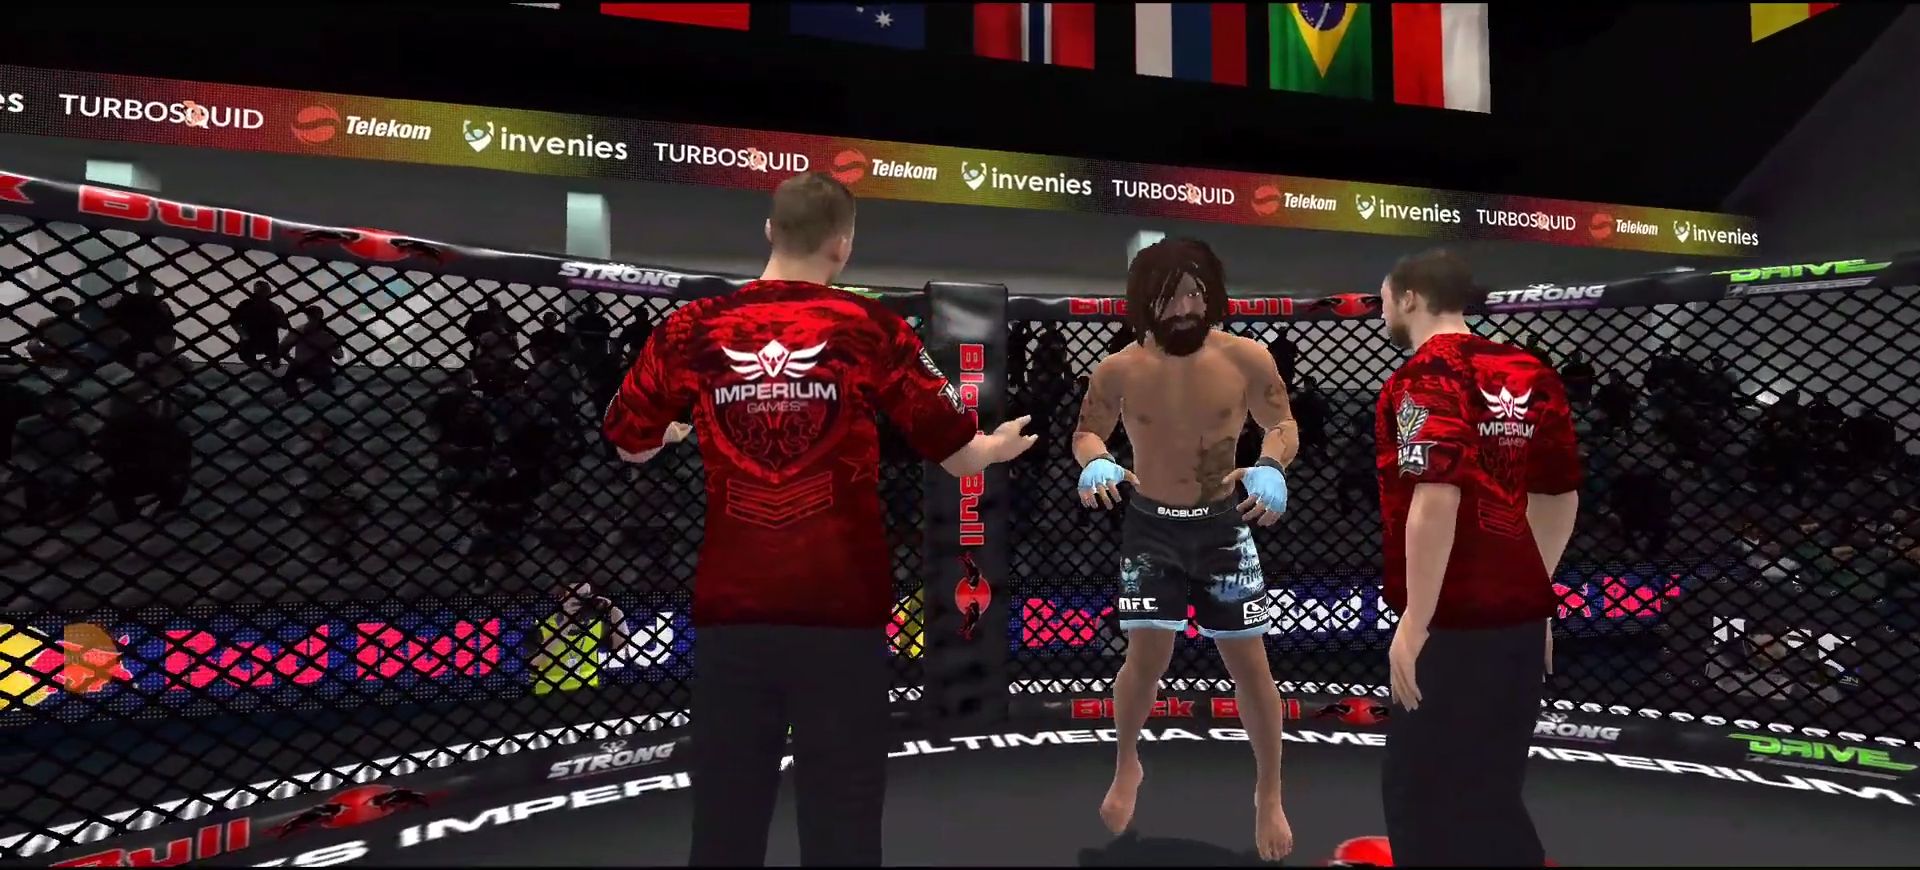 MMA Fighting Clash – Apps no Google Play